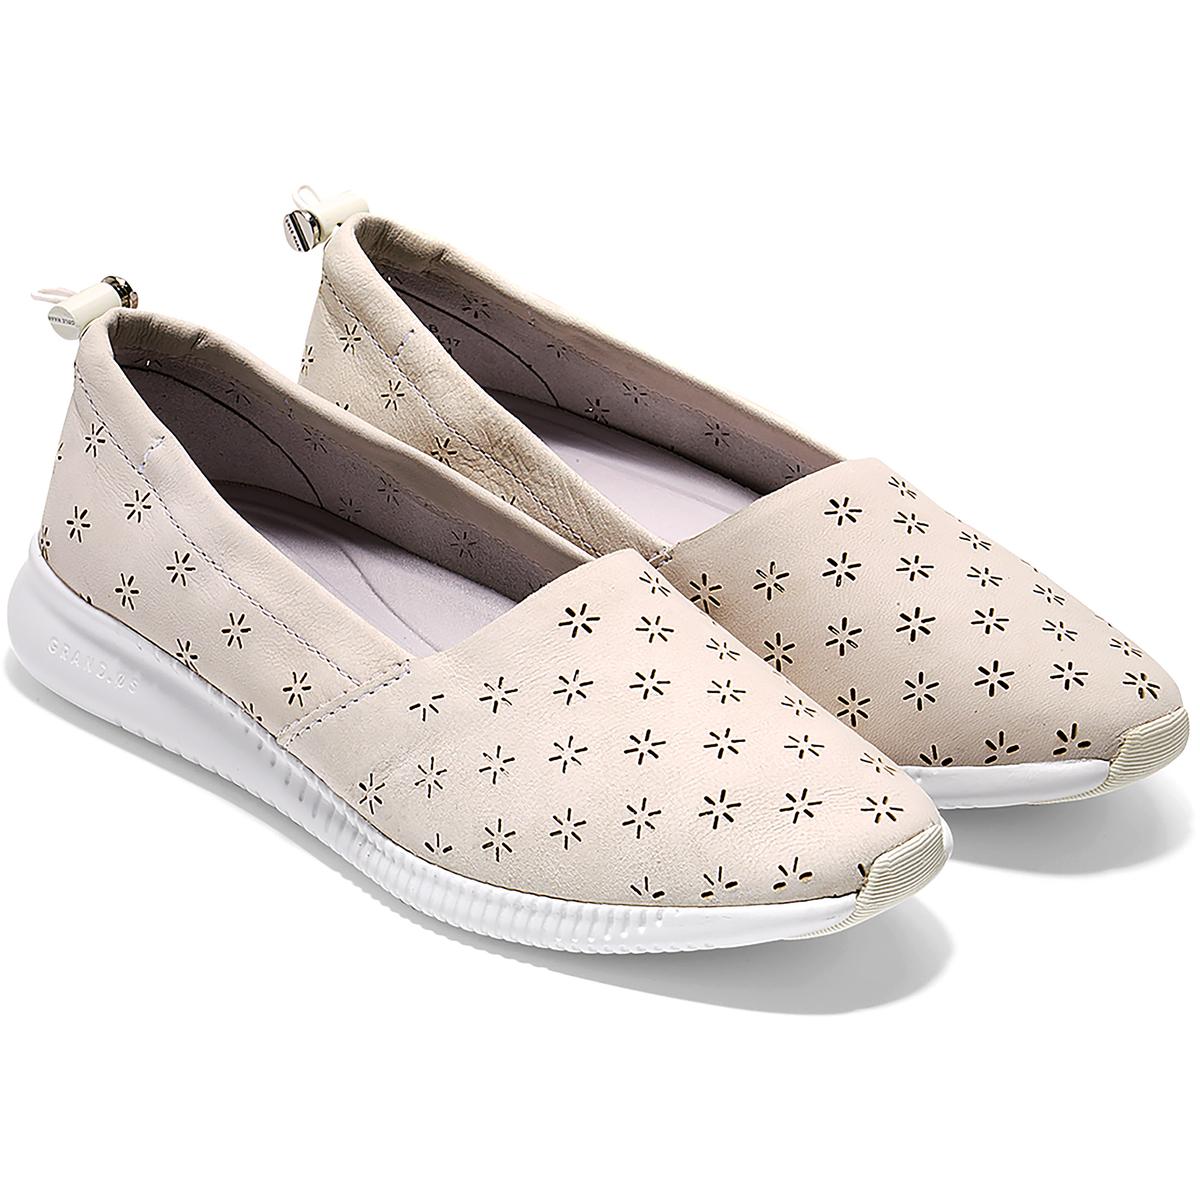 Cole Haan Womens Studio Grand Nubuck Perforated Slip On Sneakers Shoes BHFO 3904 eBay